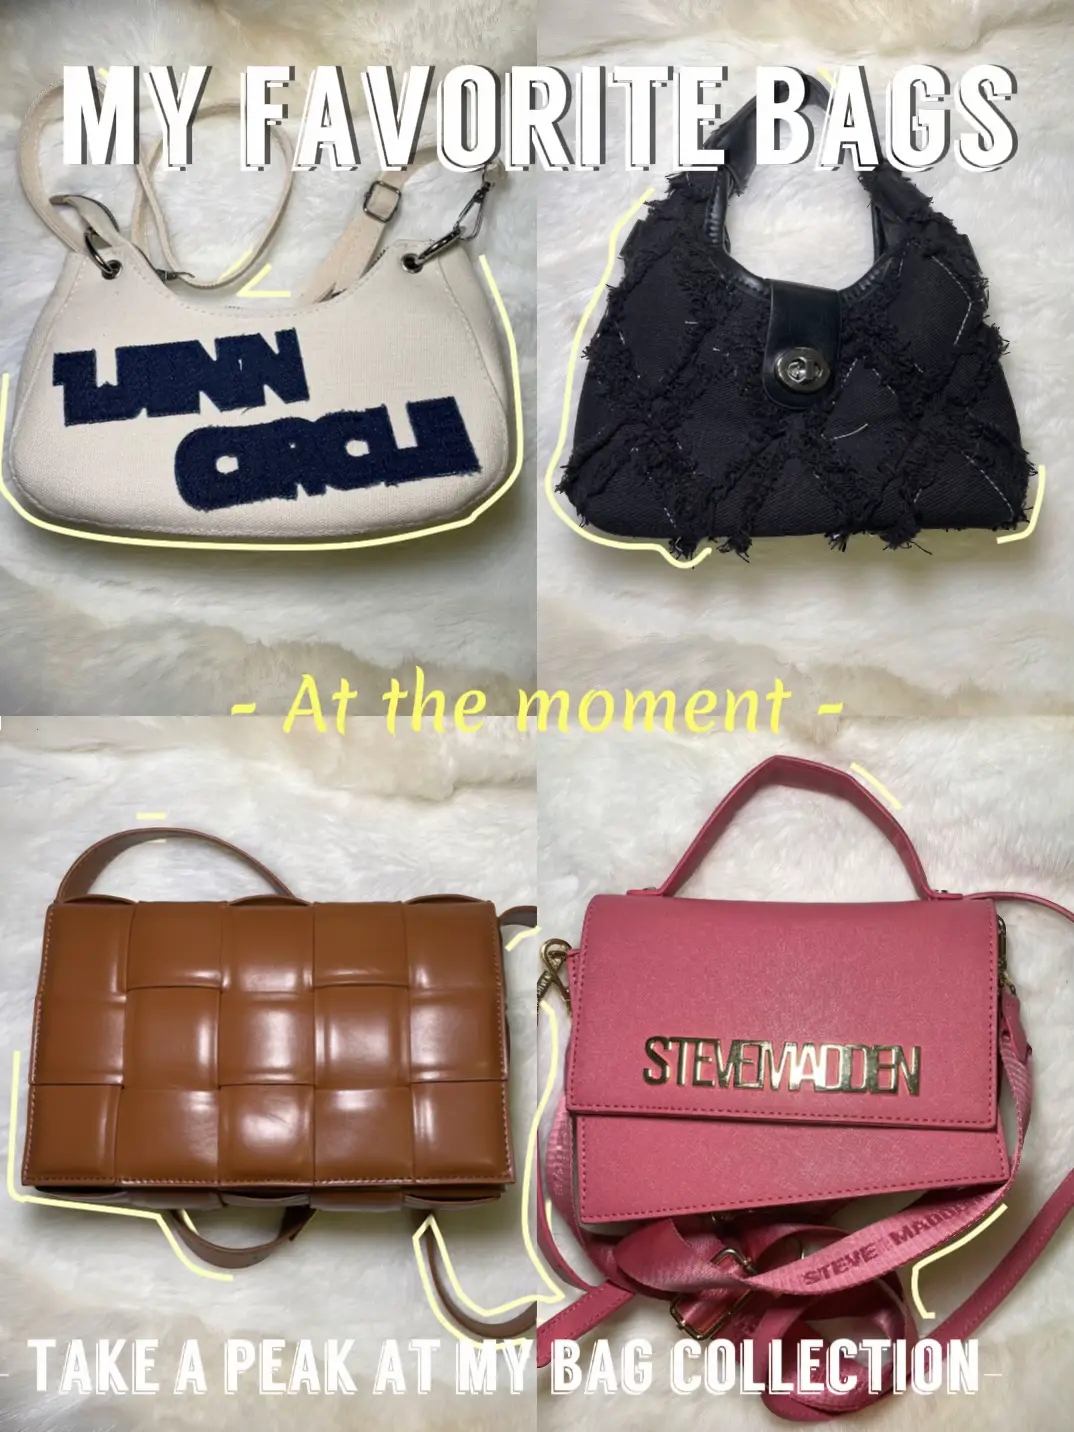 My first experience with SheIn & a designer handbag dupe